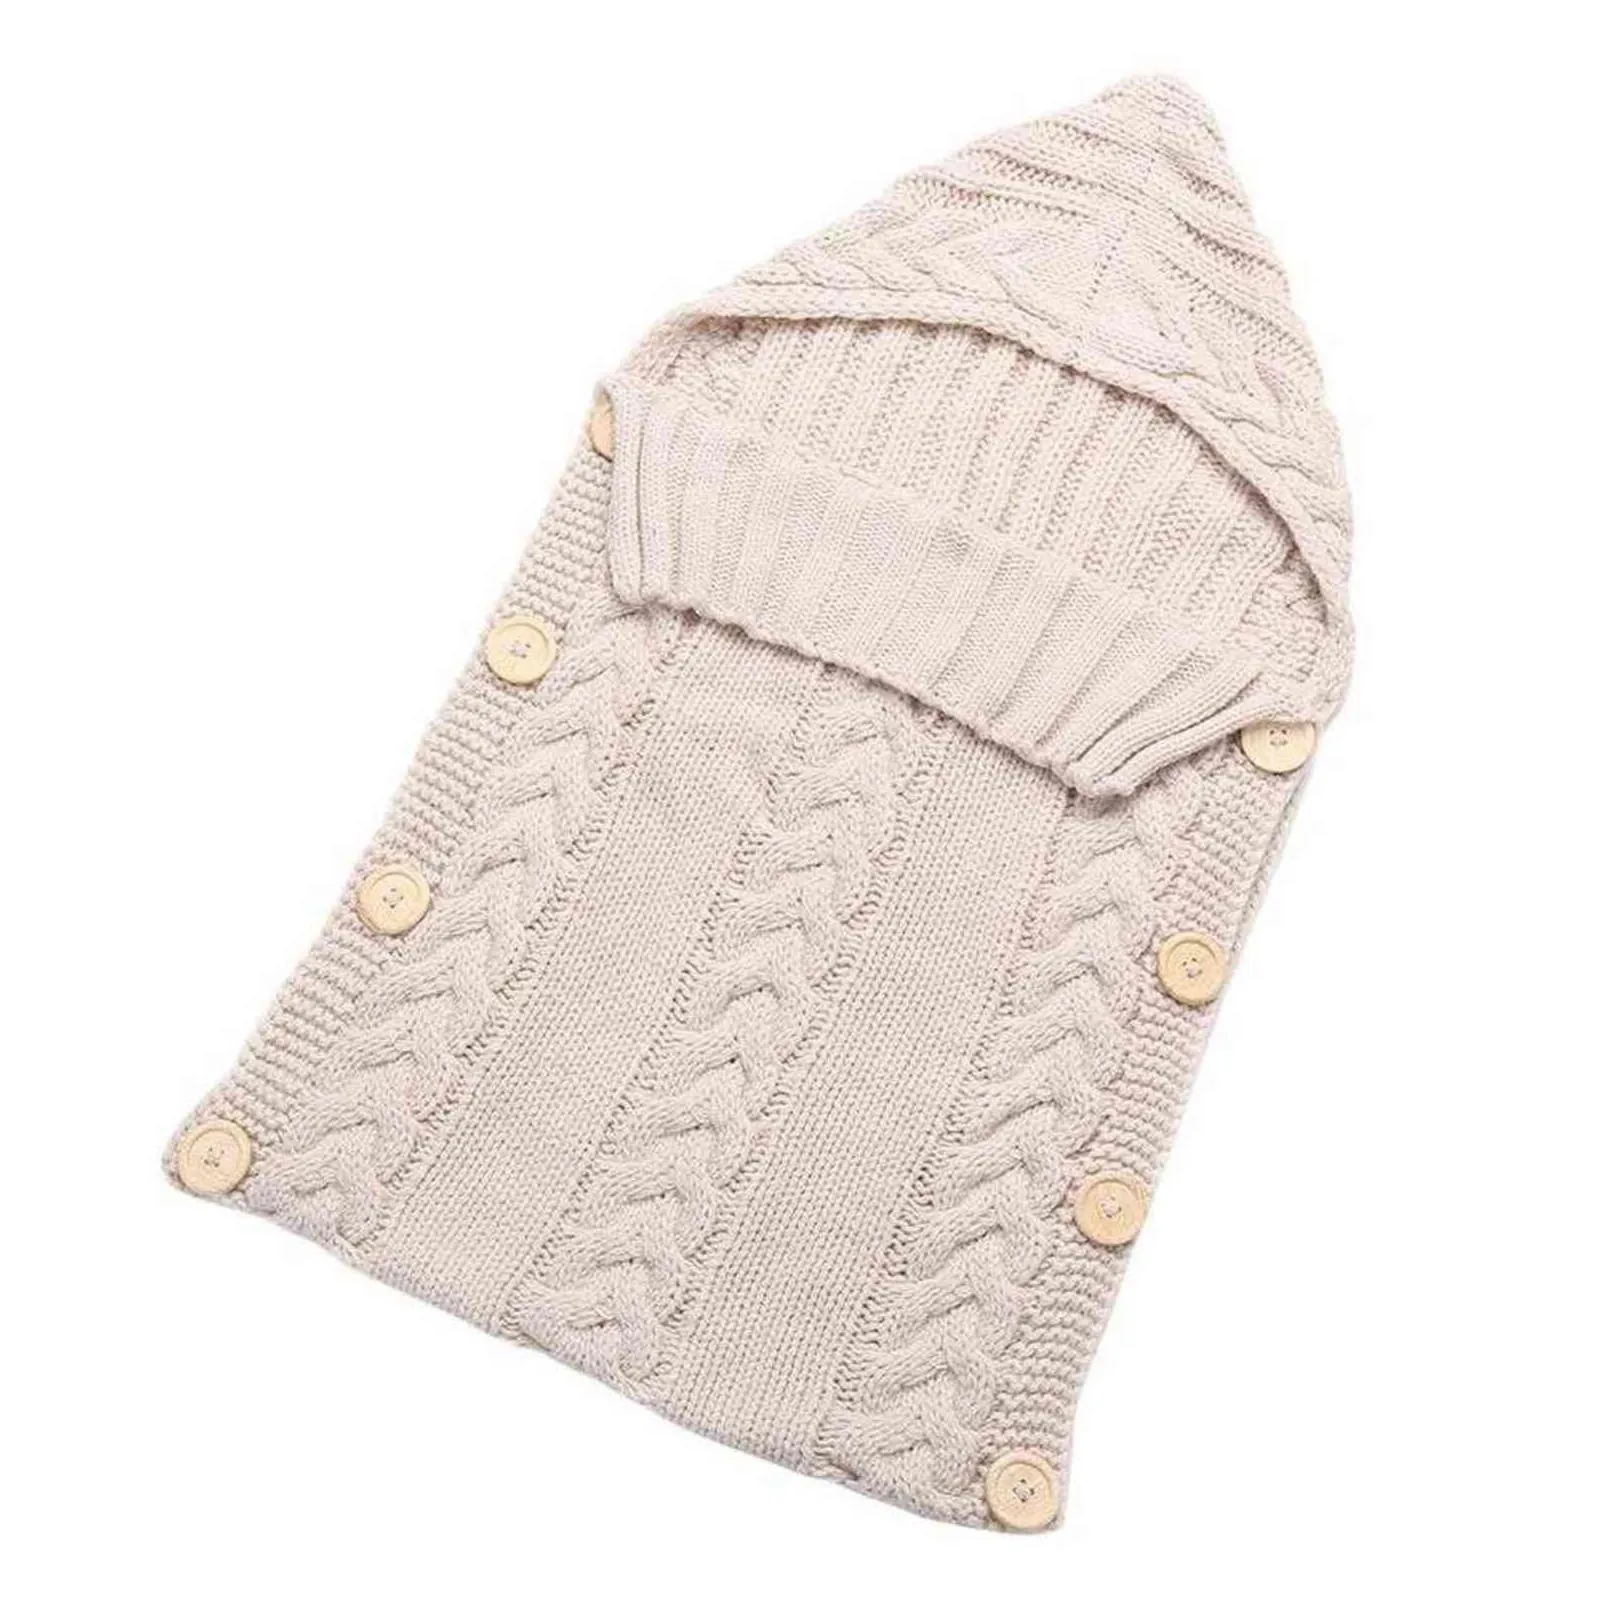 born Infant Knitted Crochet Hooded Sleeping Bags Toddler Baby Boys Girls Button Blanket Knit Warm Swaddle Wrap Bag 211101